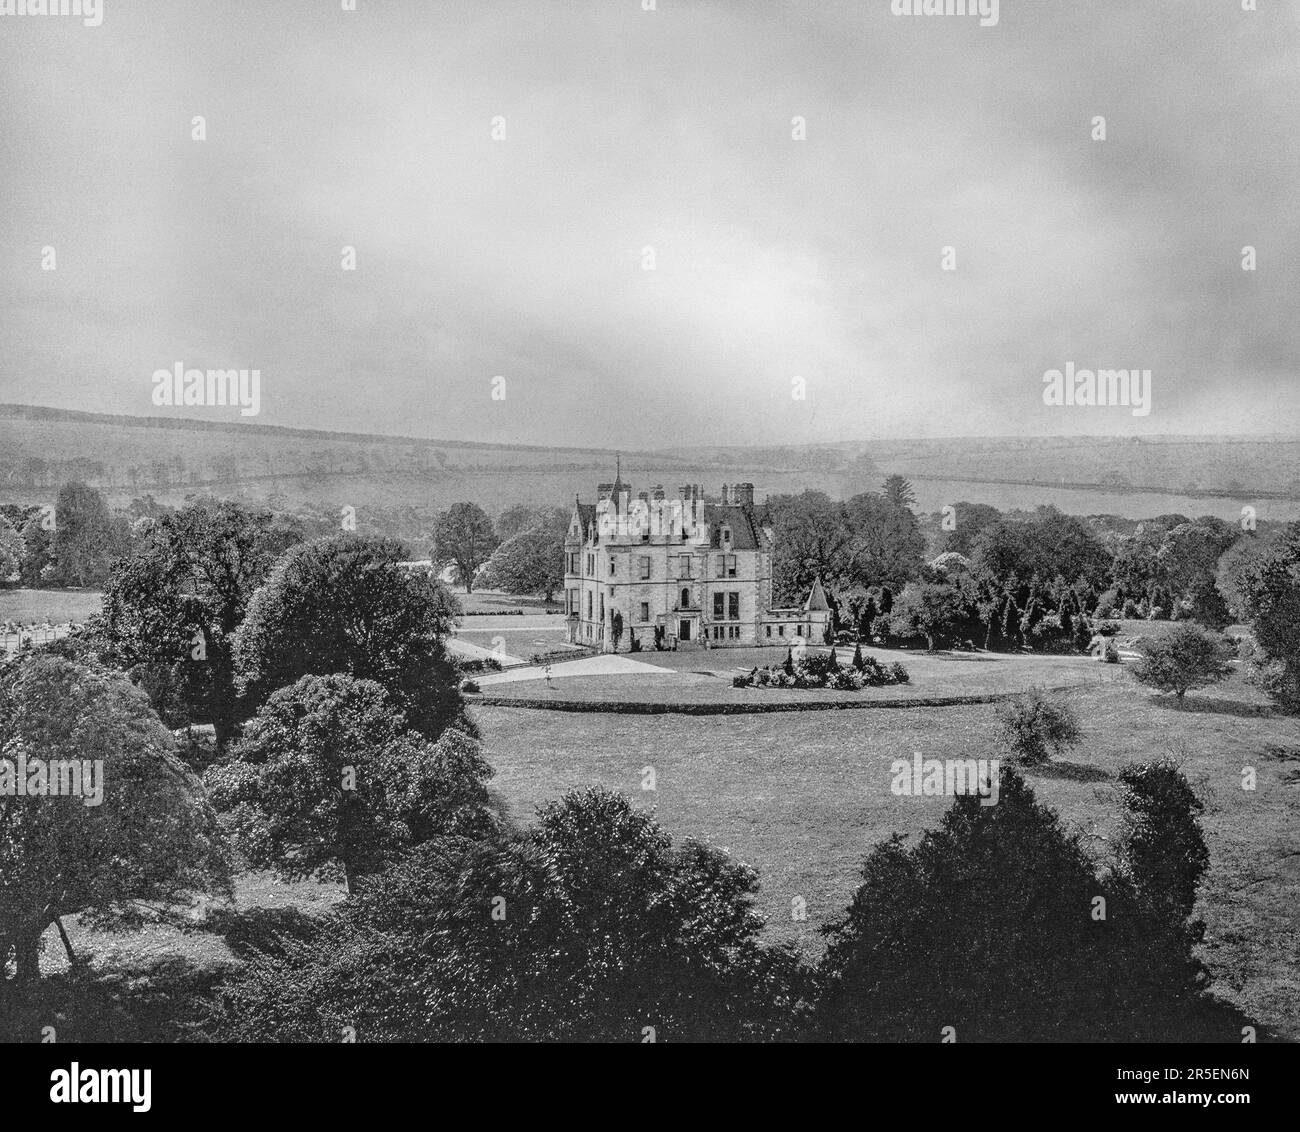 A late 19th century view of Blarney House in Blarney, County Cork, Ireland. Members of the Jefferyes family built a large house near the 15th-century castle-keep. It was destroyed by fire and, in 1874, a replacement mansion, built in a Scottish baronial-style by John Lanyon of Lanyon, Lynn and Lanyon architects, overlooking a nearby lake. Stock Photo